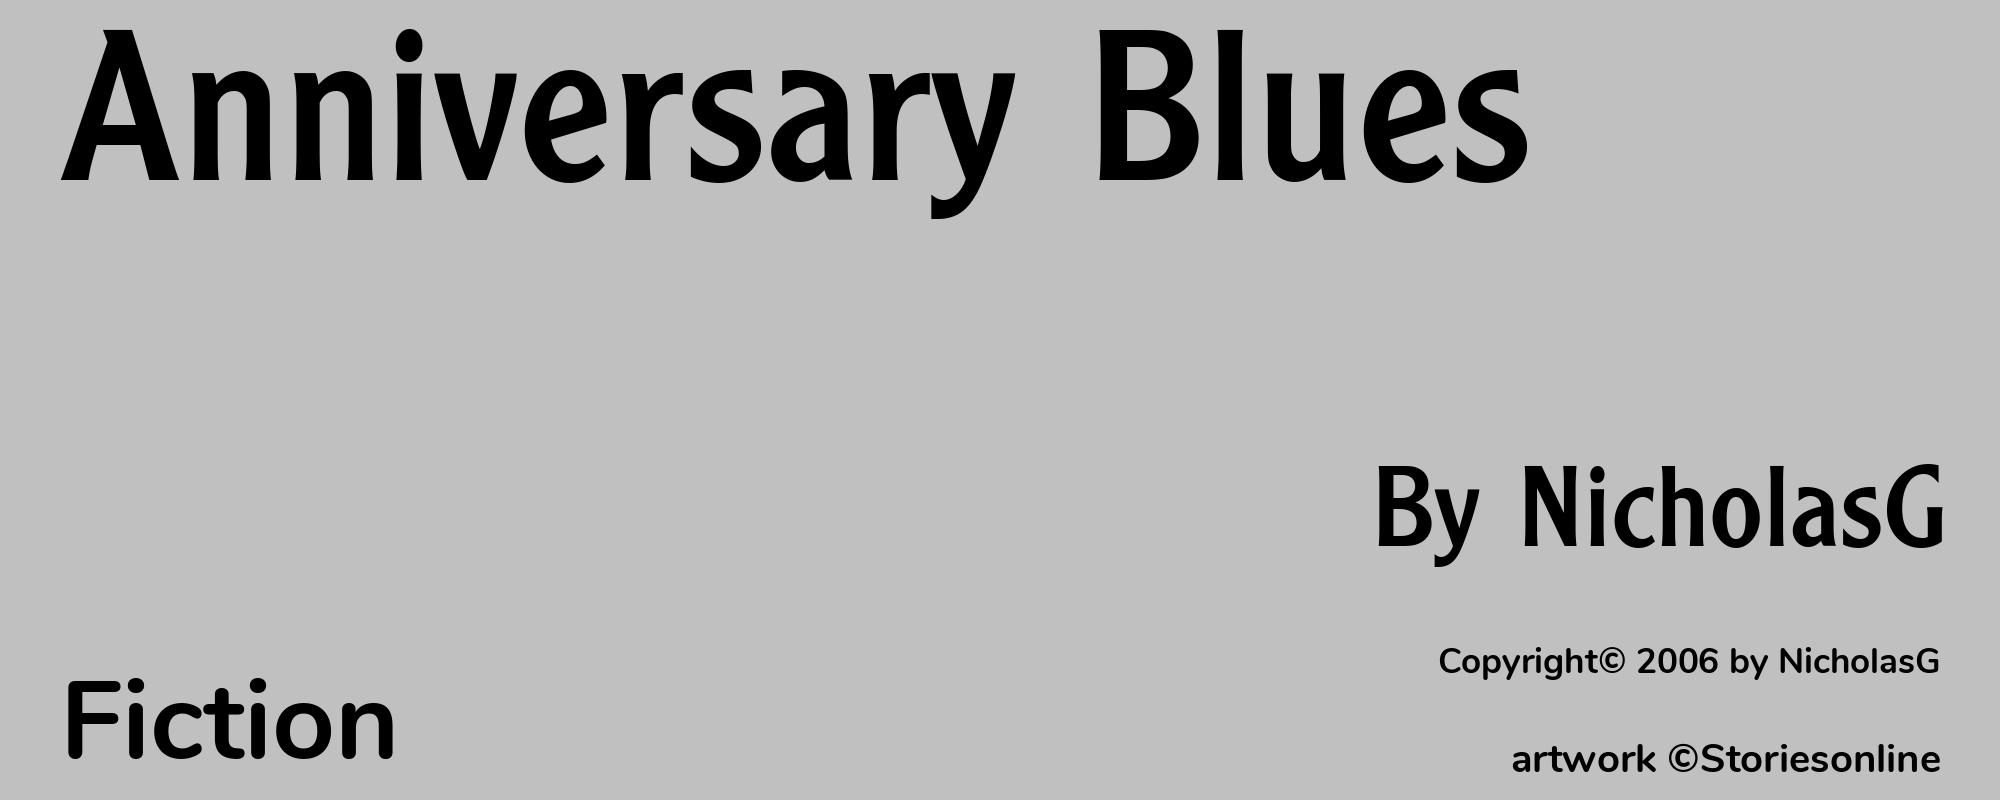 Anniversary Blues - Cover